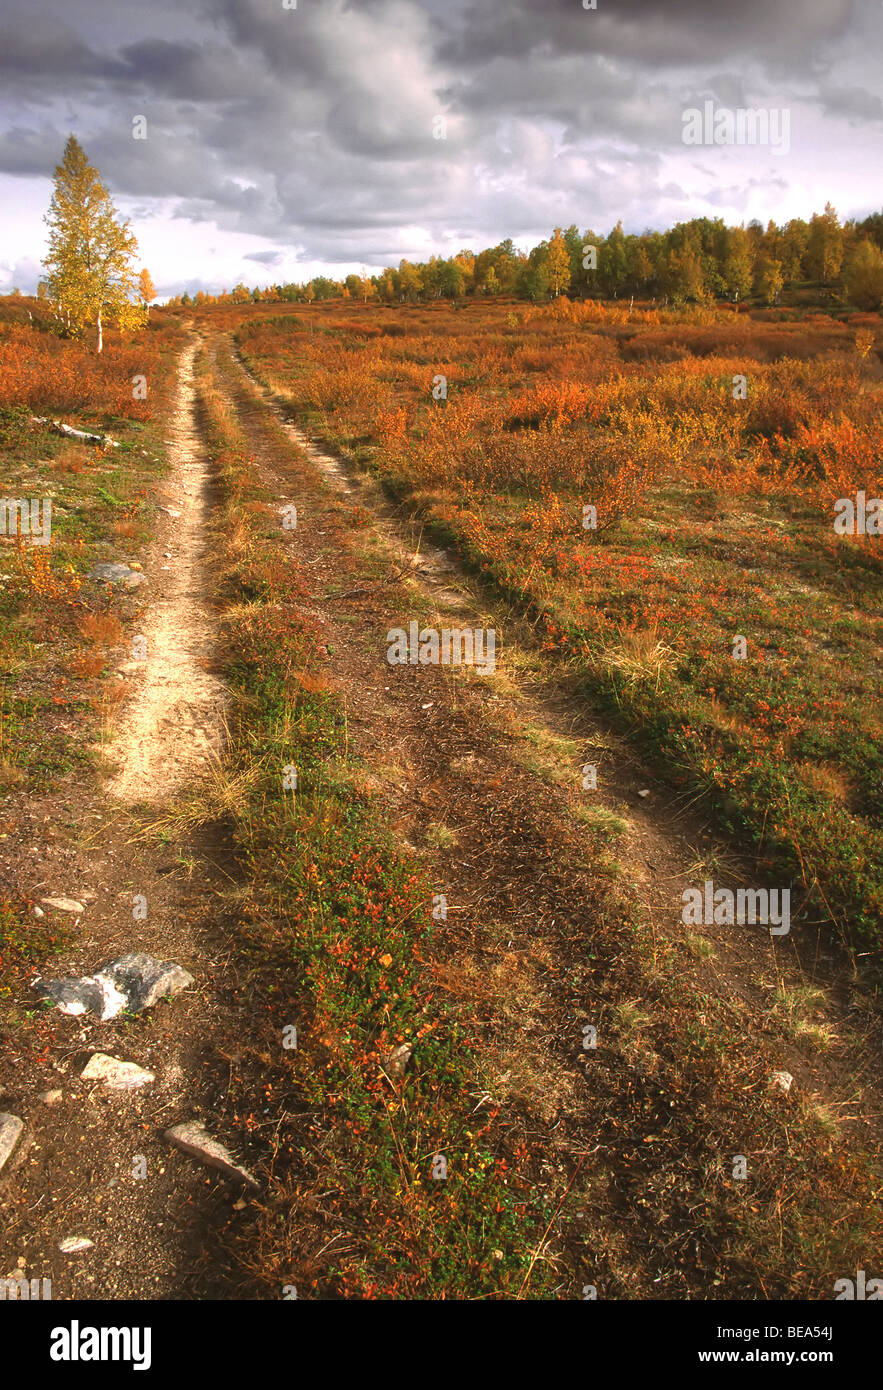 Path through tundra landscape with Birches (Betula sp.) in autumn, Lapland, Finland Stock Photo